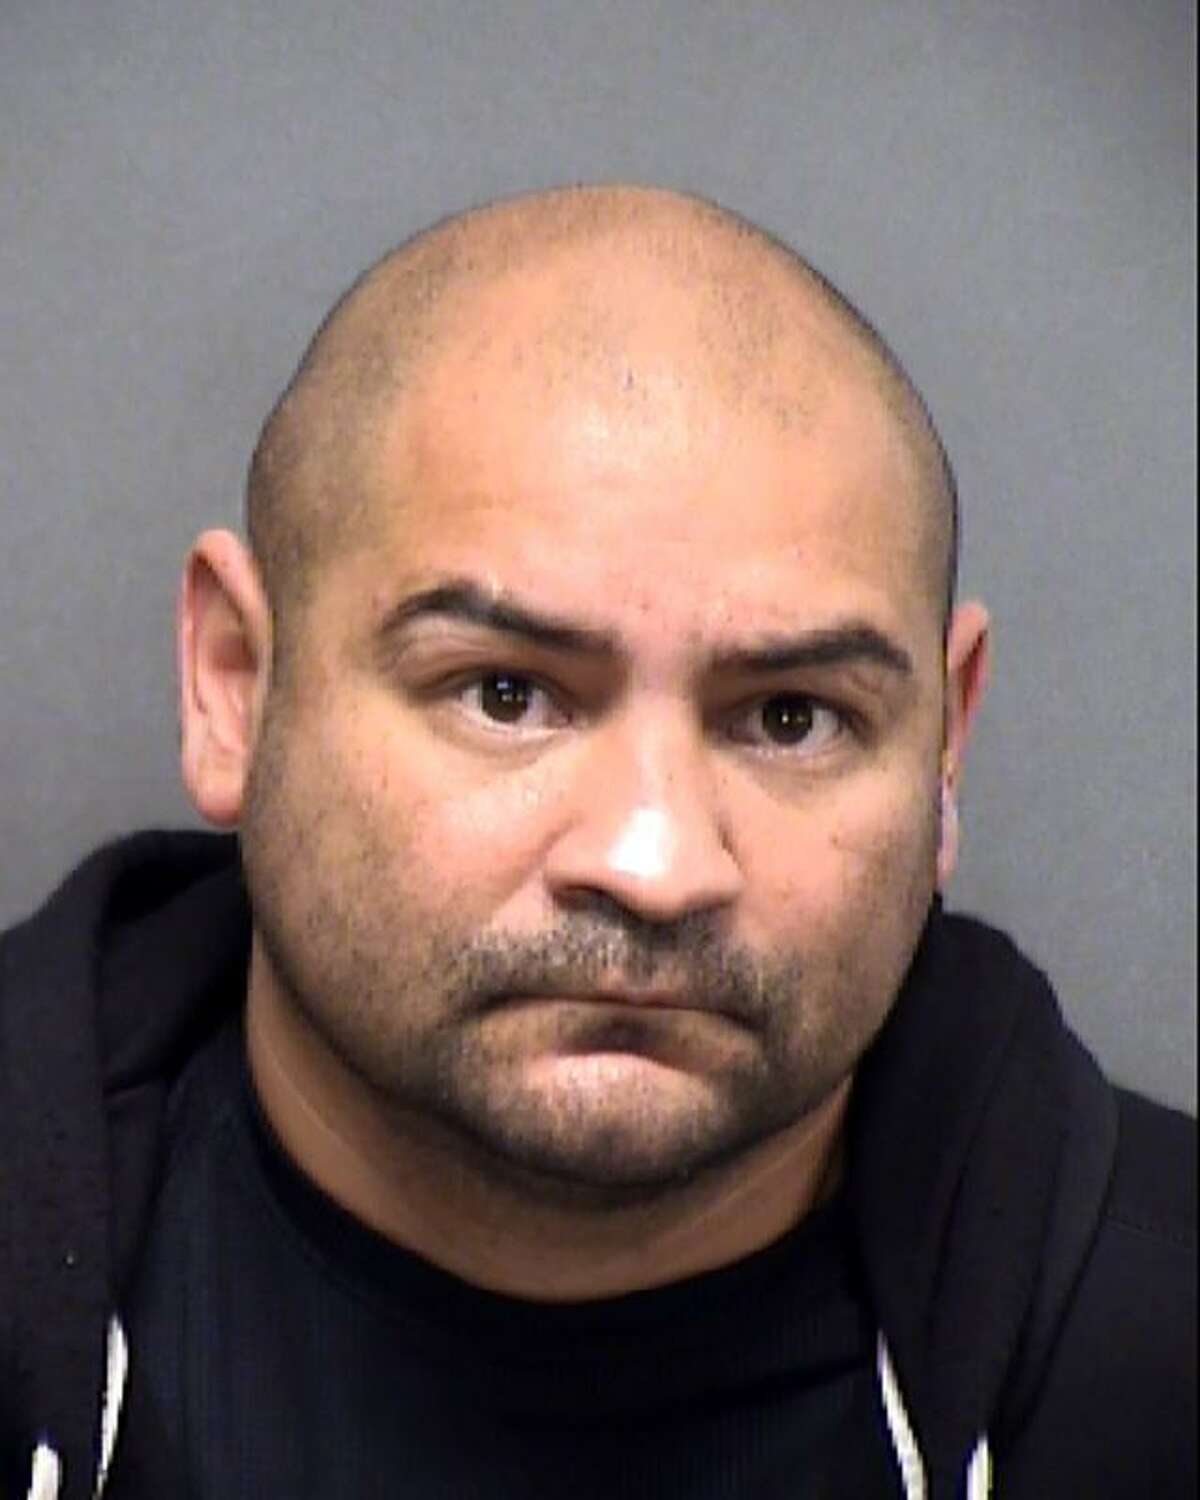 Erik Rodriguez, a San Antonio police officer, is accused of bribery, misuse of public information and possession of child pornography. A grand jury reviewed the evidence and indicted him on Monday, Jan. 25, 2021.